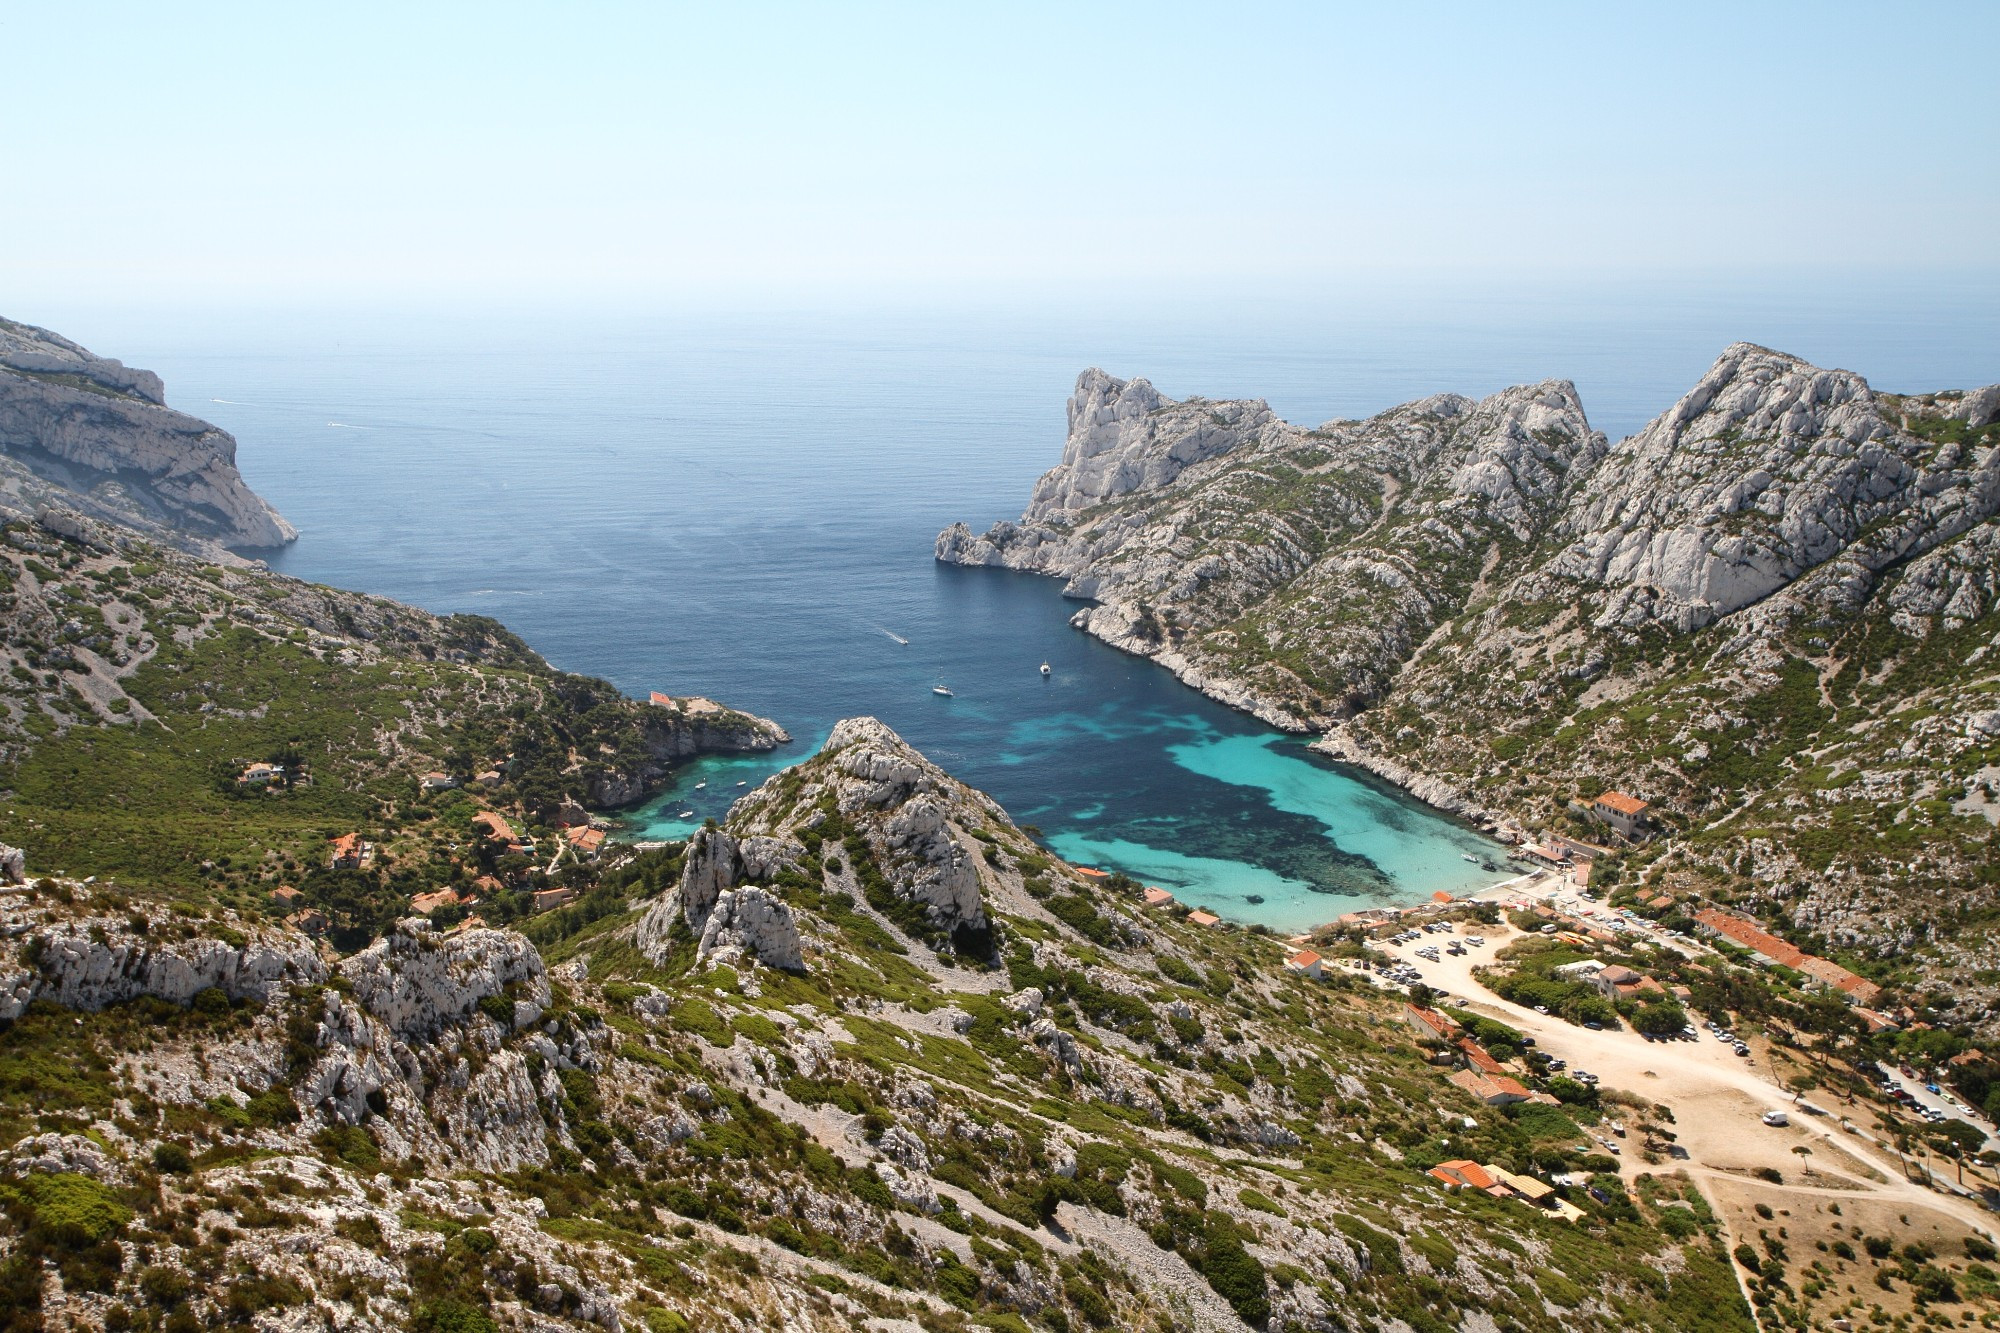 https://commons.wikimedia.org/wiki/File:Marseille_Calanque_Sormiou.jpg